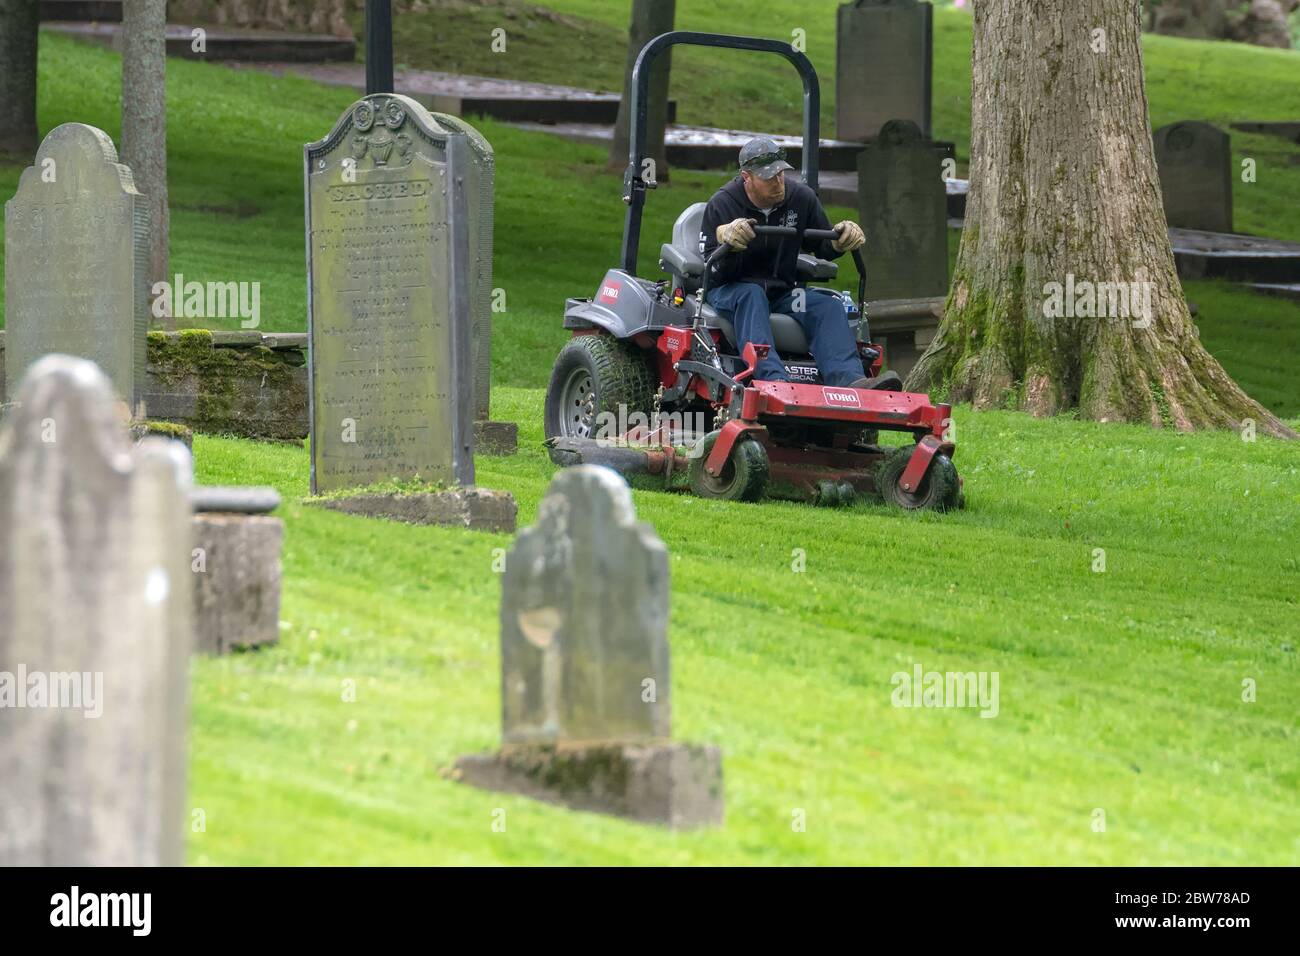 Saint John, New Brunswick, Canada - July 25, 2018: A man using a riding lawn mower to mow the lawn in a grave yard. Stock Photo